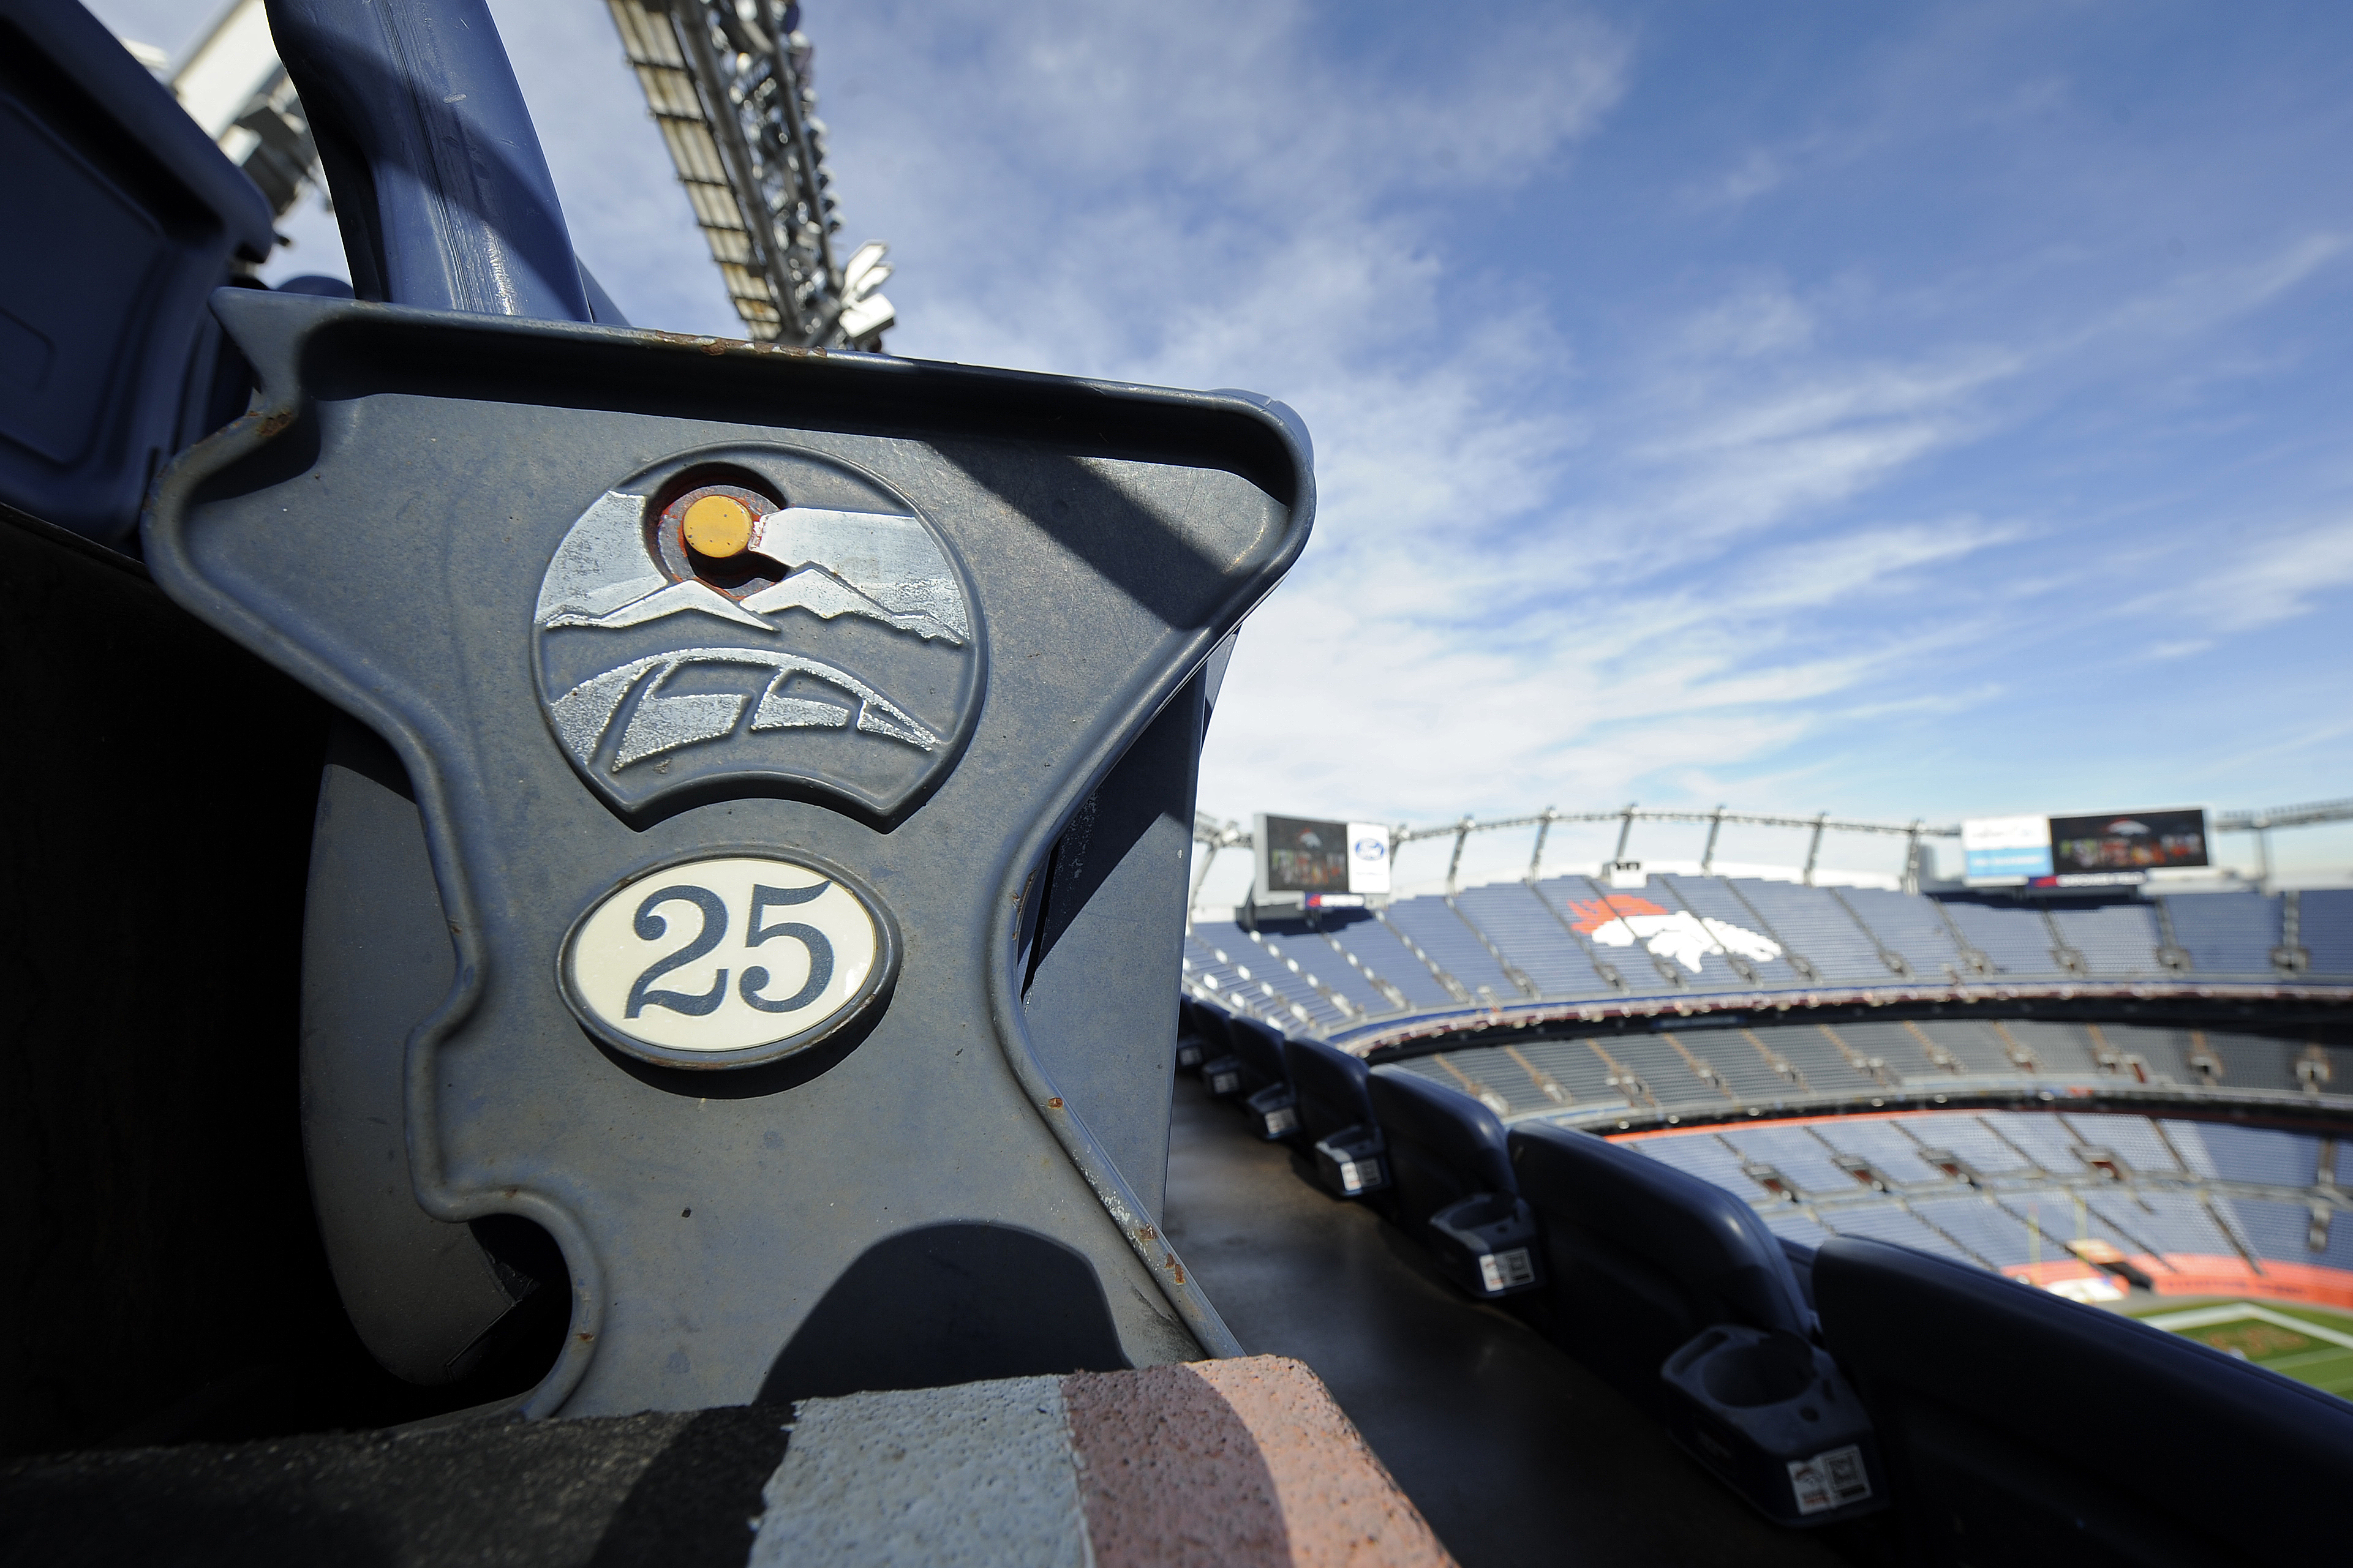 NFL: NOV 28 Chargers at Broncos